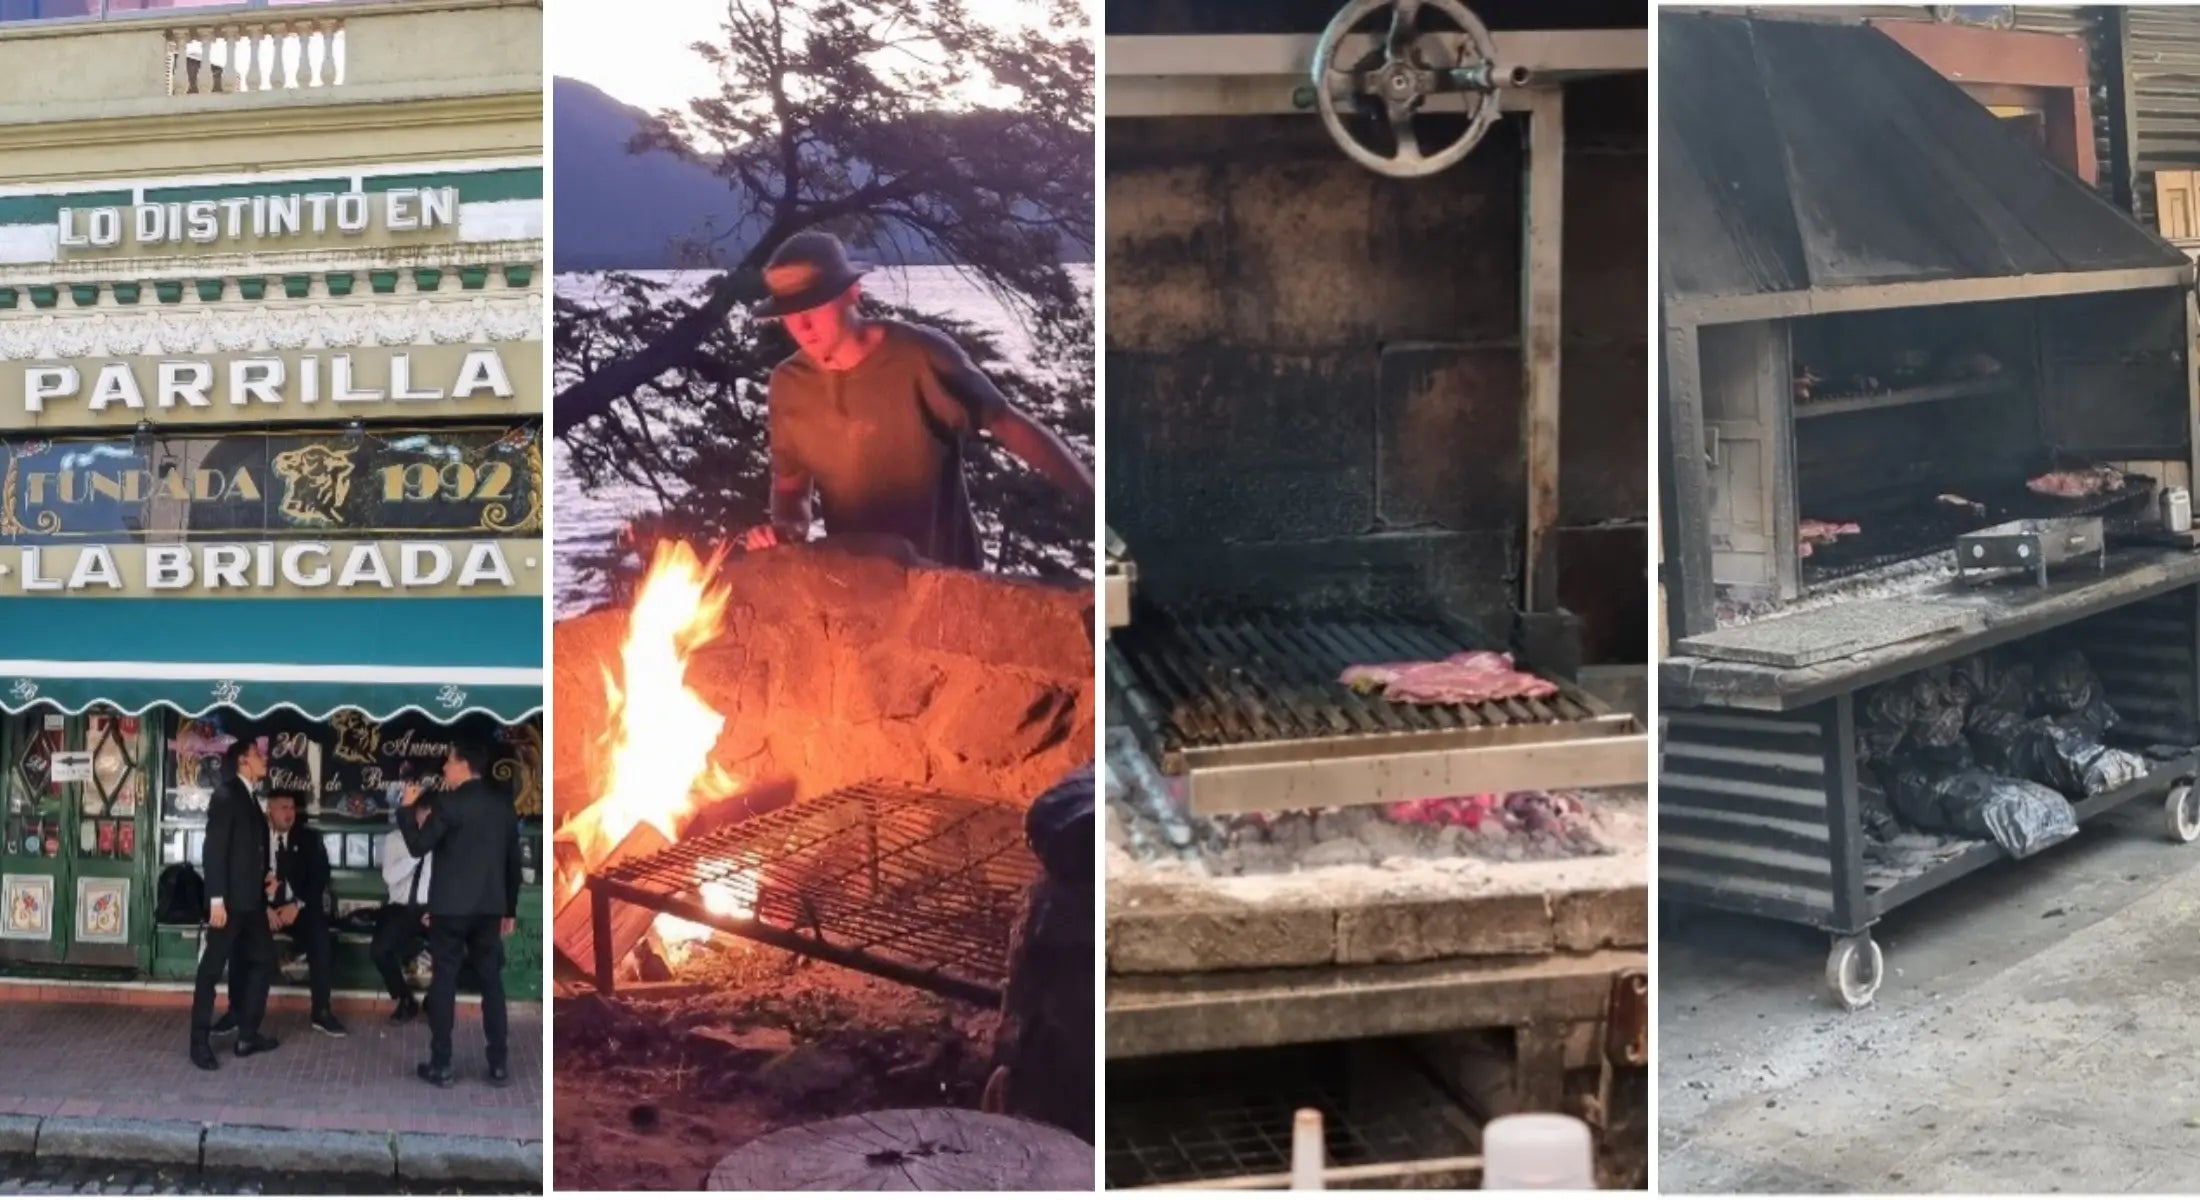 8 THINGS I LEARNED ABOUT FIRE COOKING IN ARGENTINA